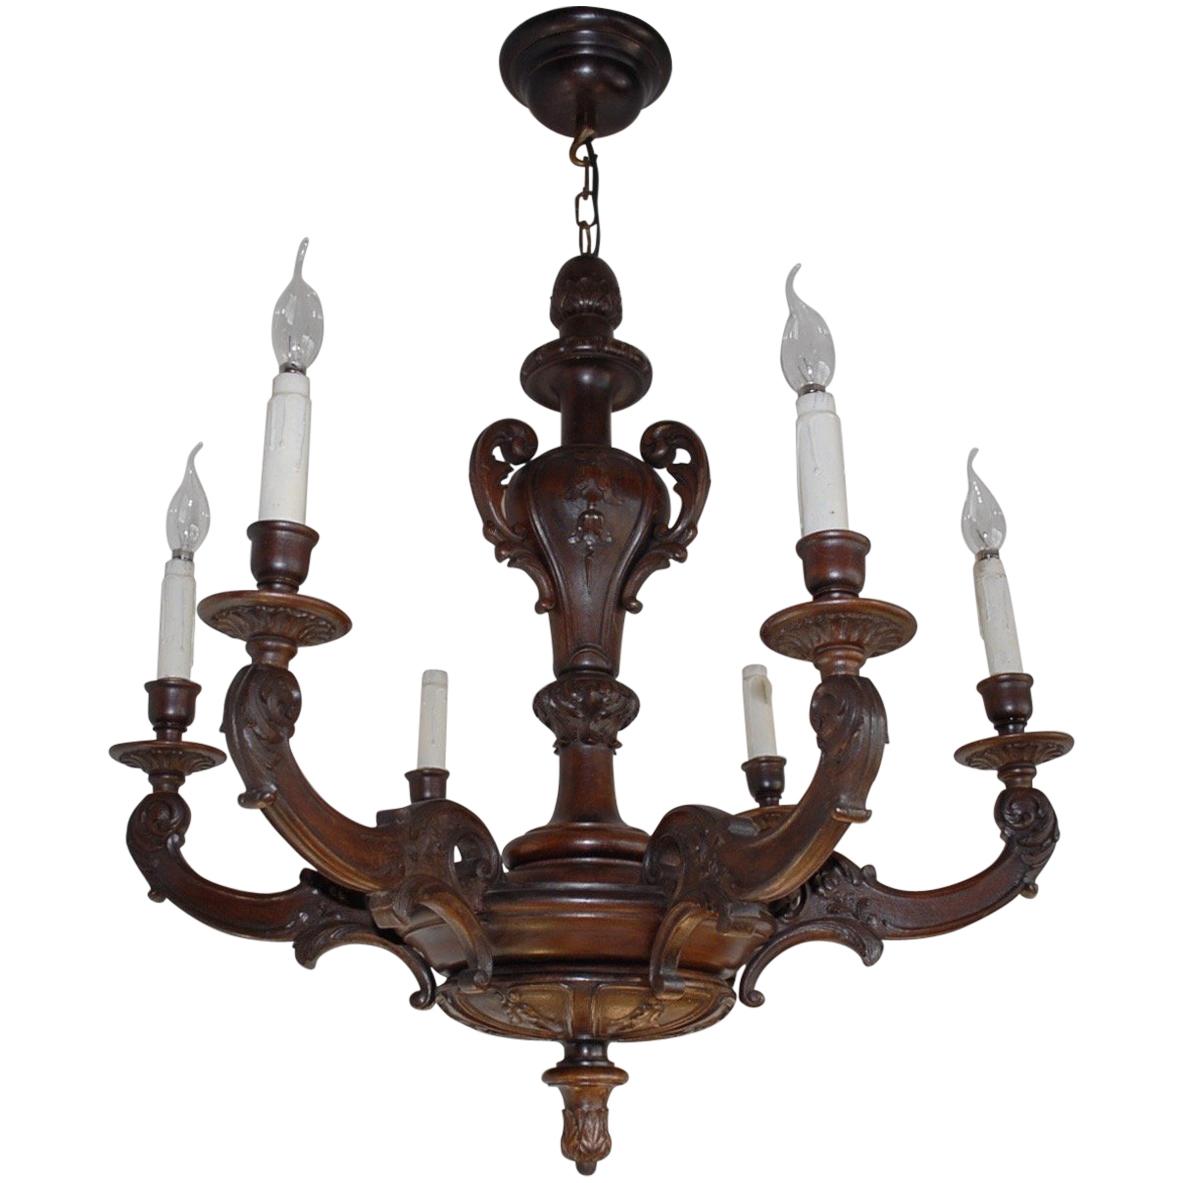 Fabulous Early 1900's Six-Light Quality Carved Nutwood Chandelier Light Fixture